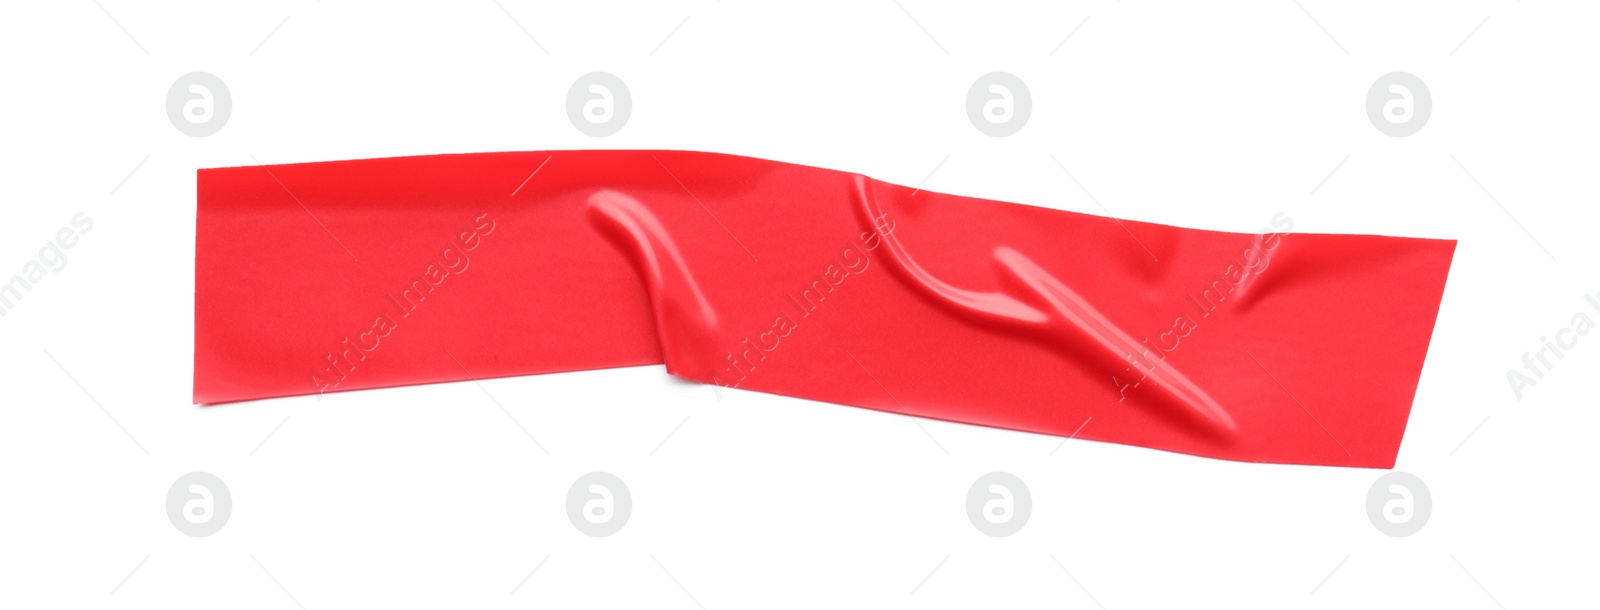 Photo of Piece of red insulating tape isolated on white, top view